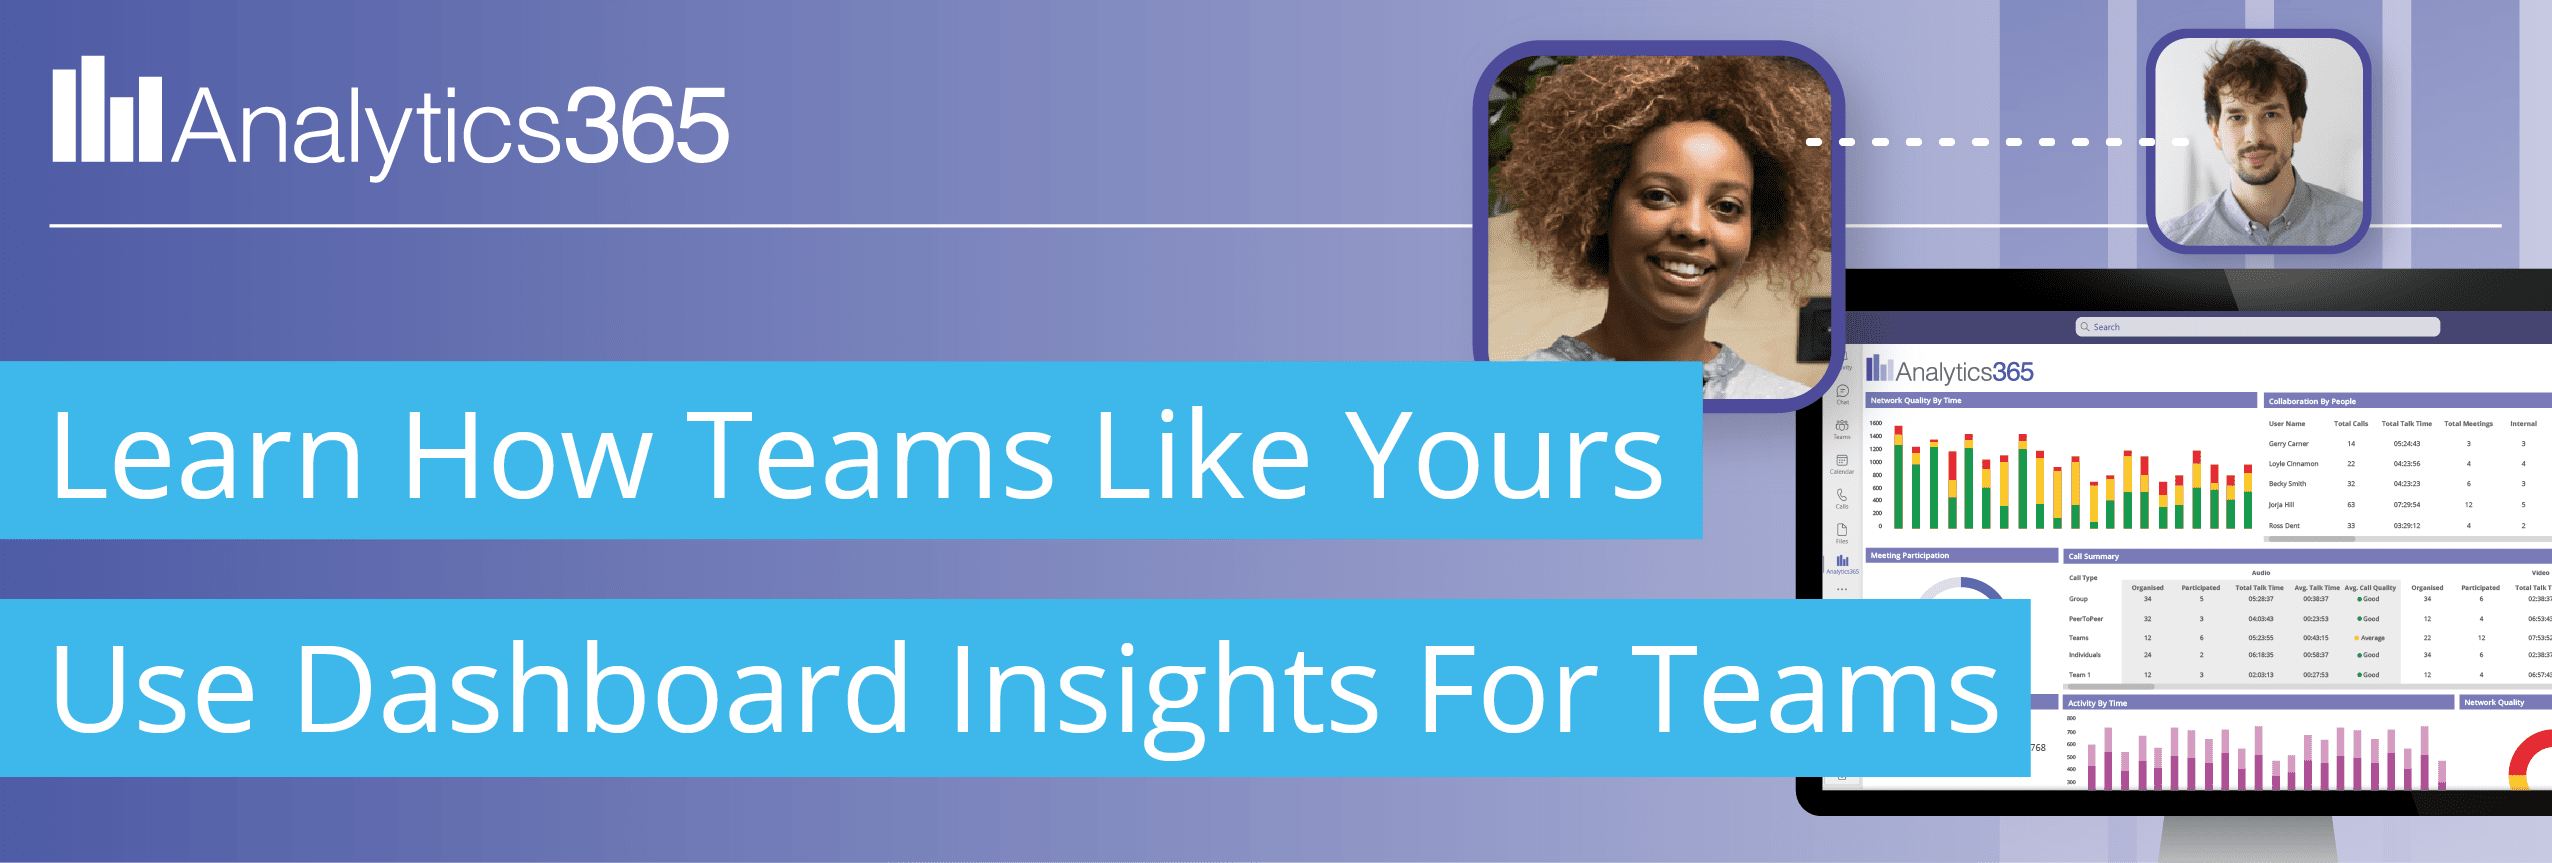 Learn how teams like yours use dashboard insights for Teams with Analytics 365